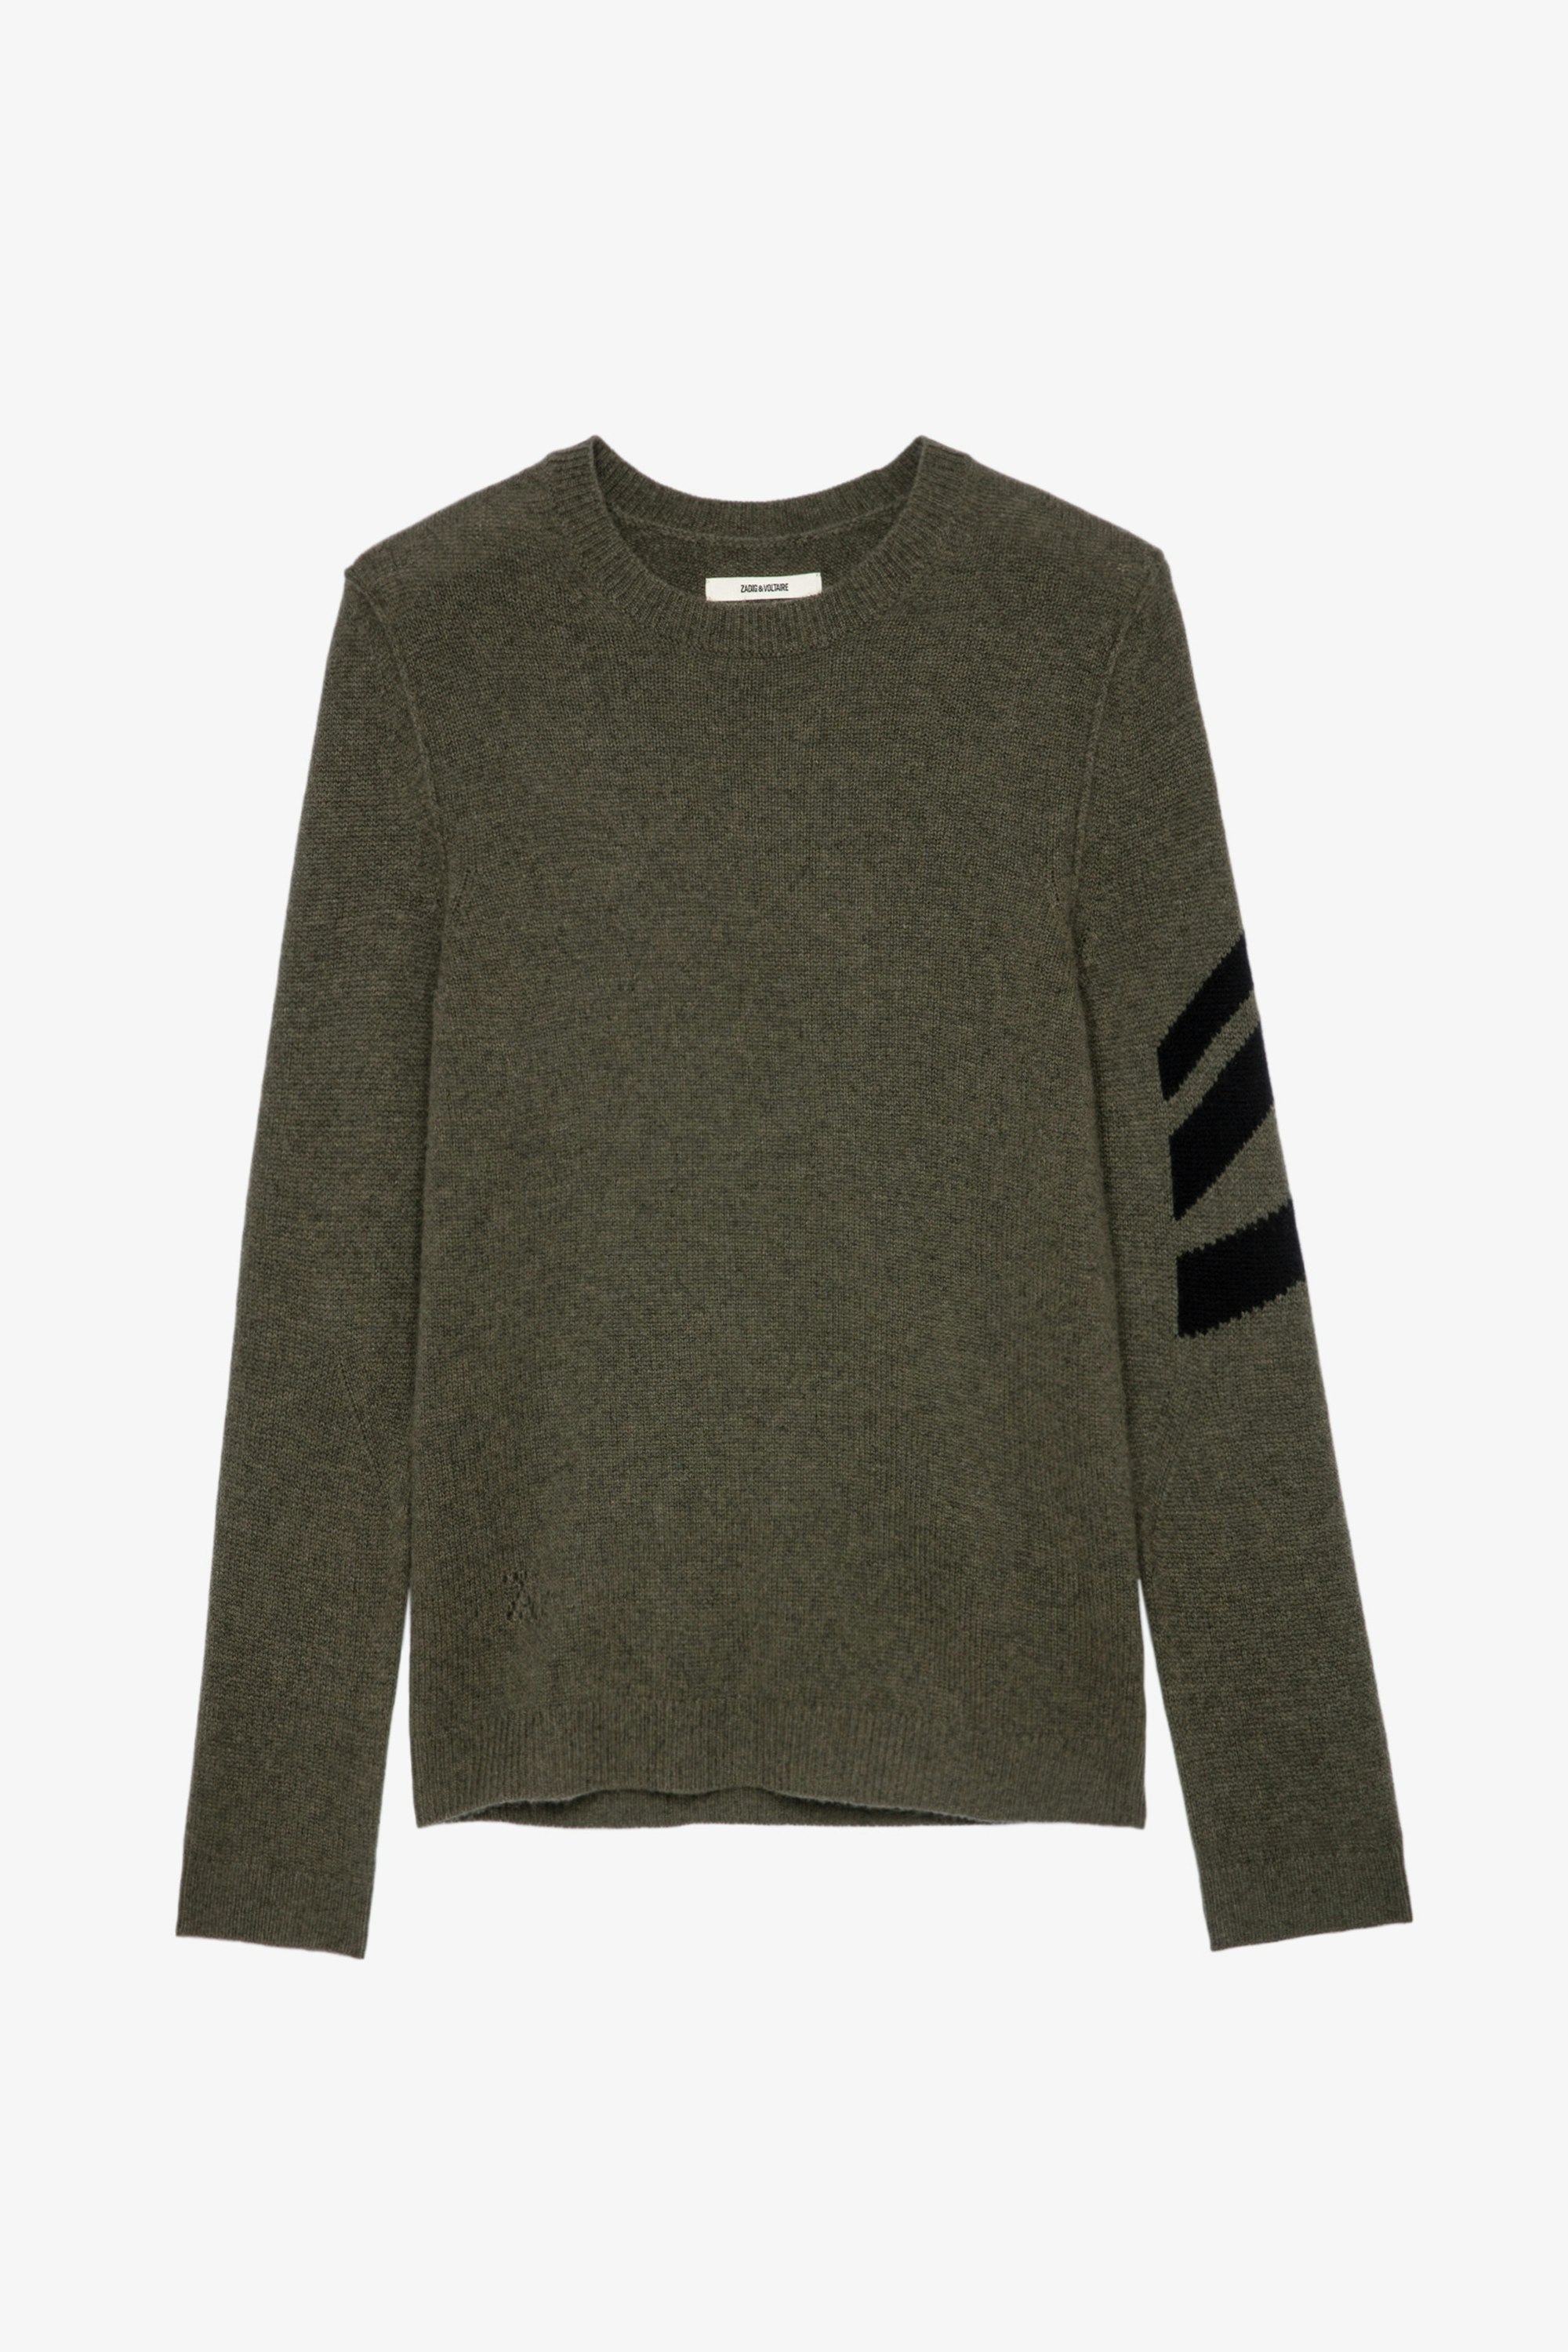 Kennedy Cashmere Jumper - Men’s khaki cashmere sweater with arrows on the sleeve